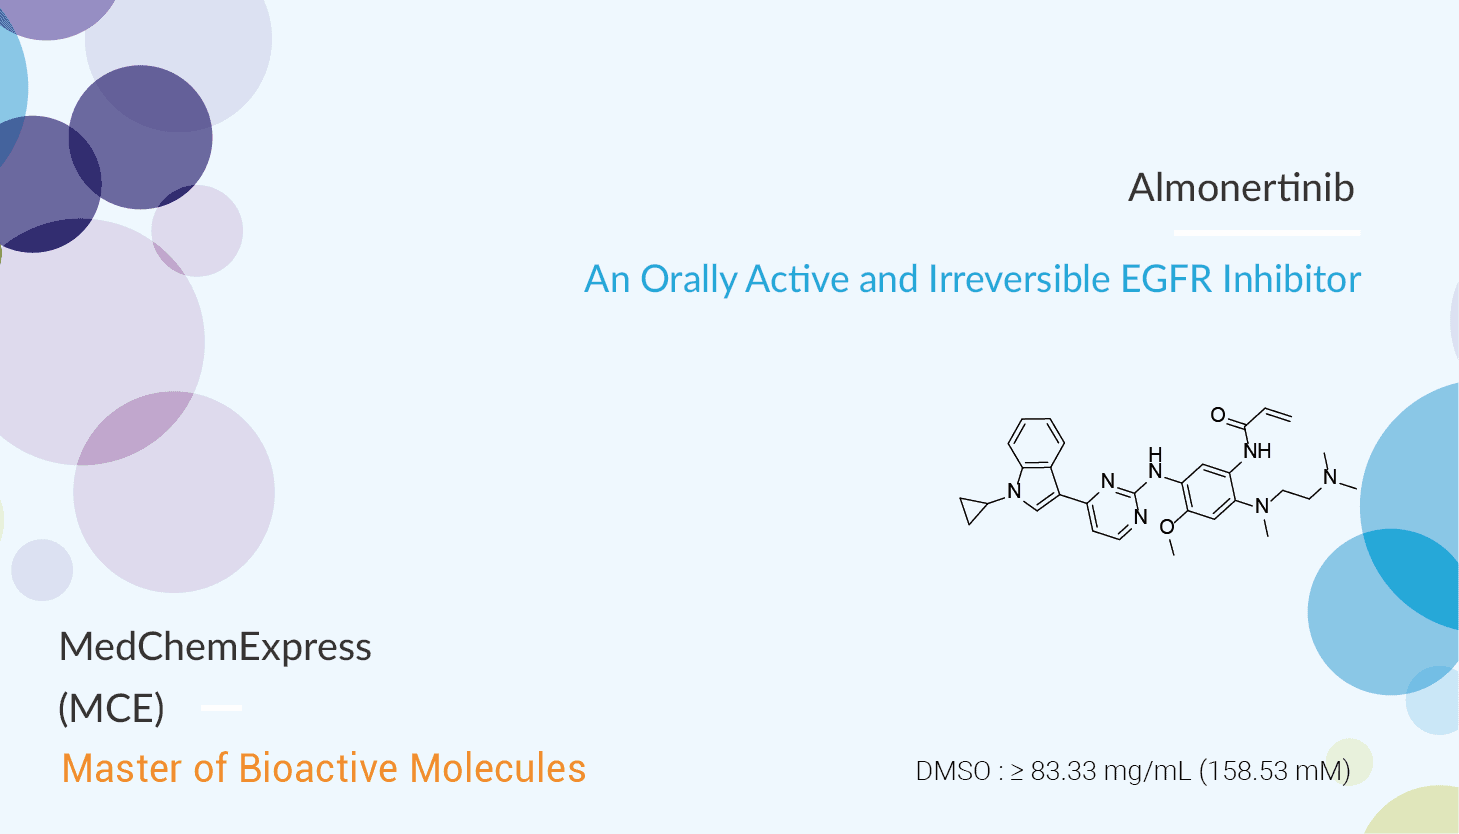 Almonertinib an Orally Active and Irreversible EGFR Inhibitor 2021 12 25 - Almonertinib is an Orally Active and Irreversible EGFR Inhibitor